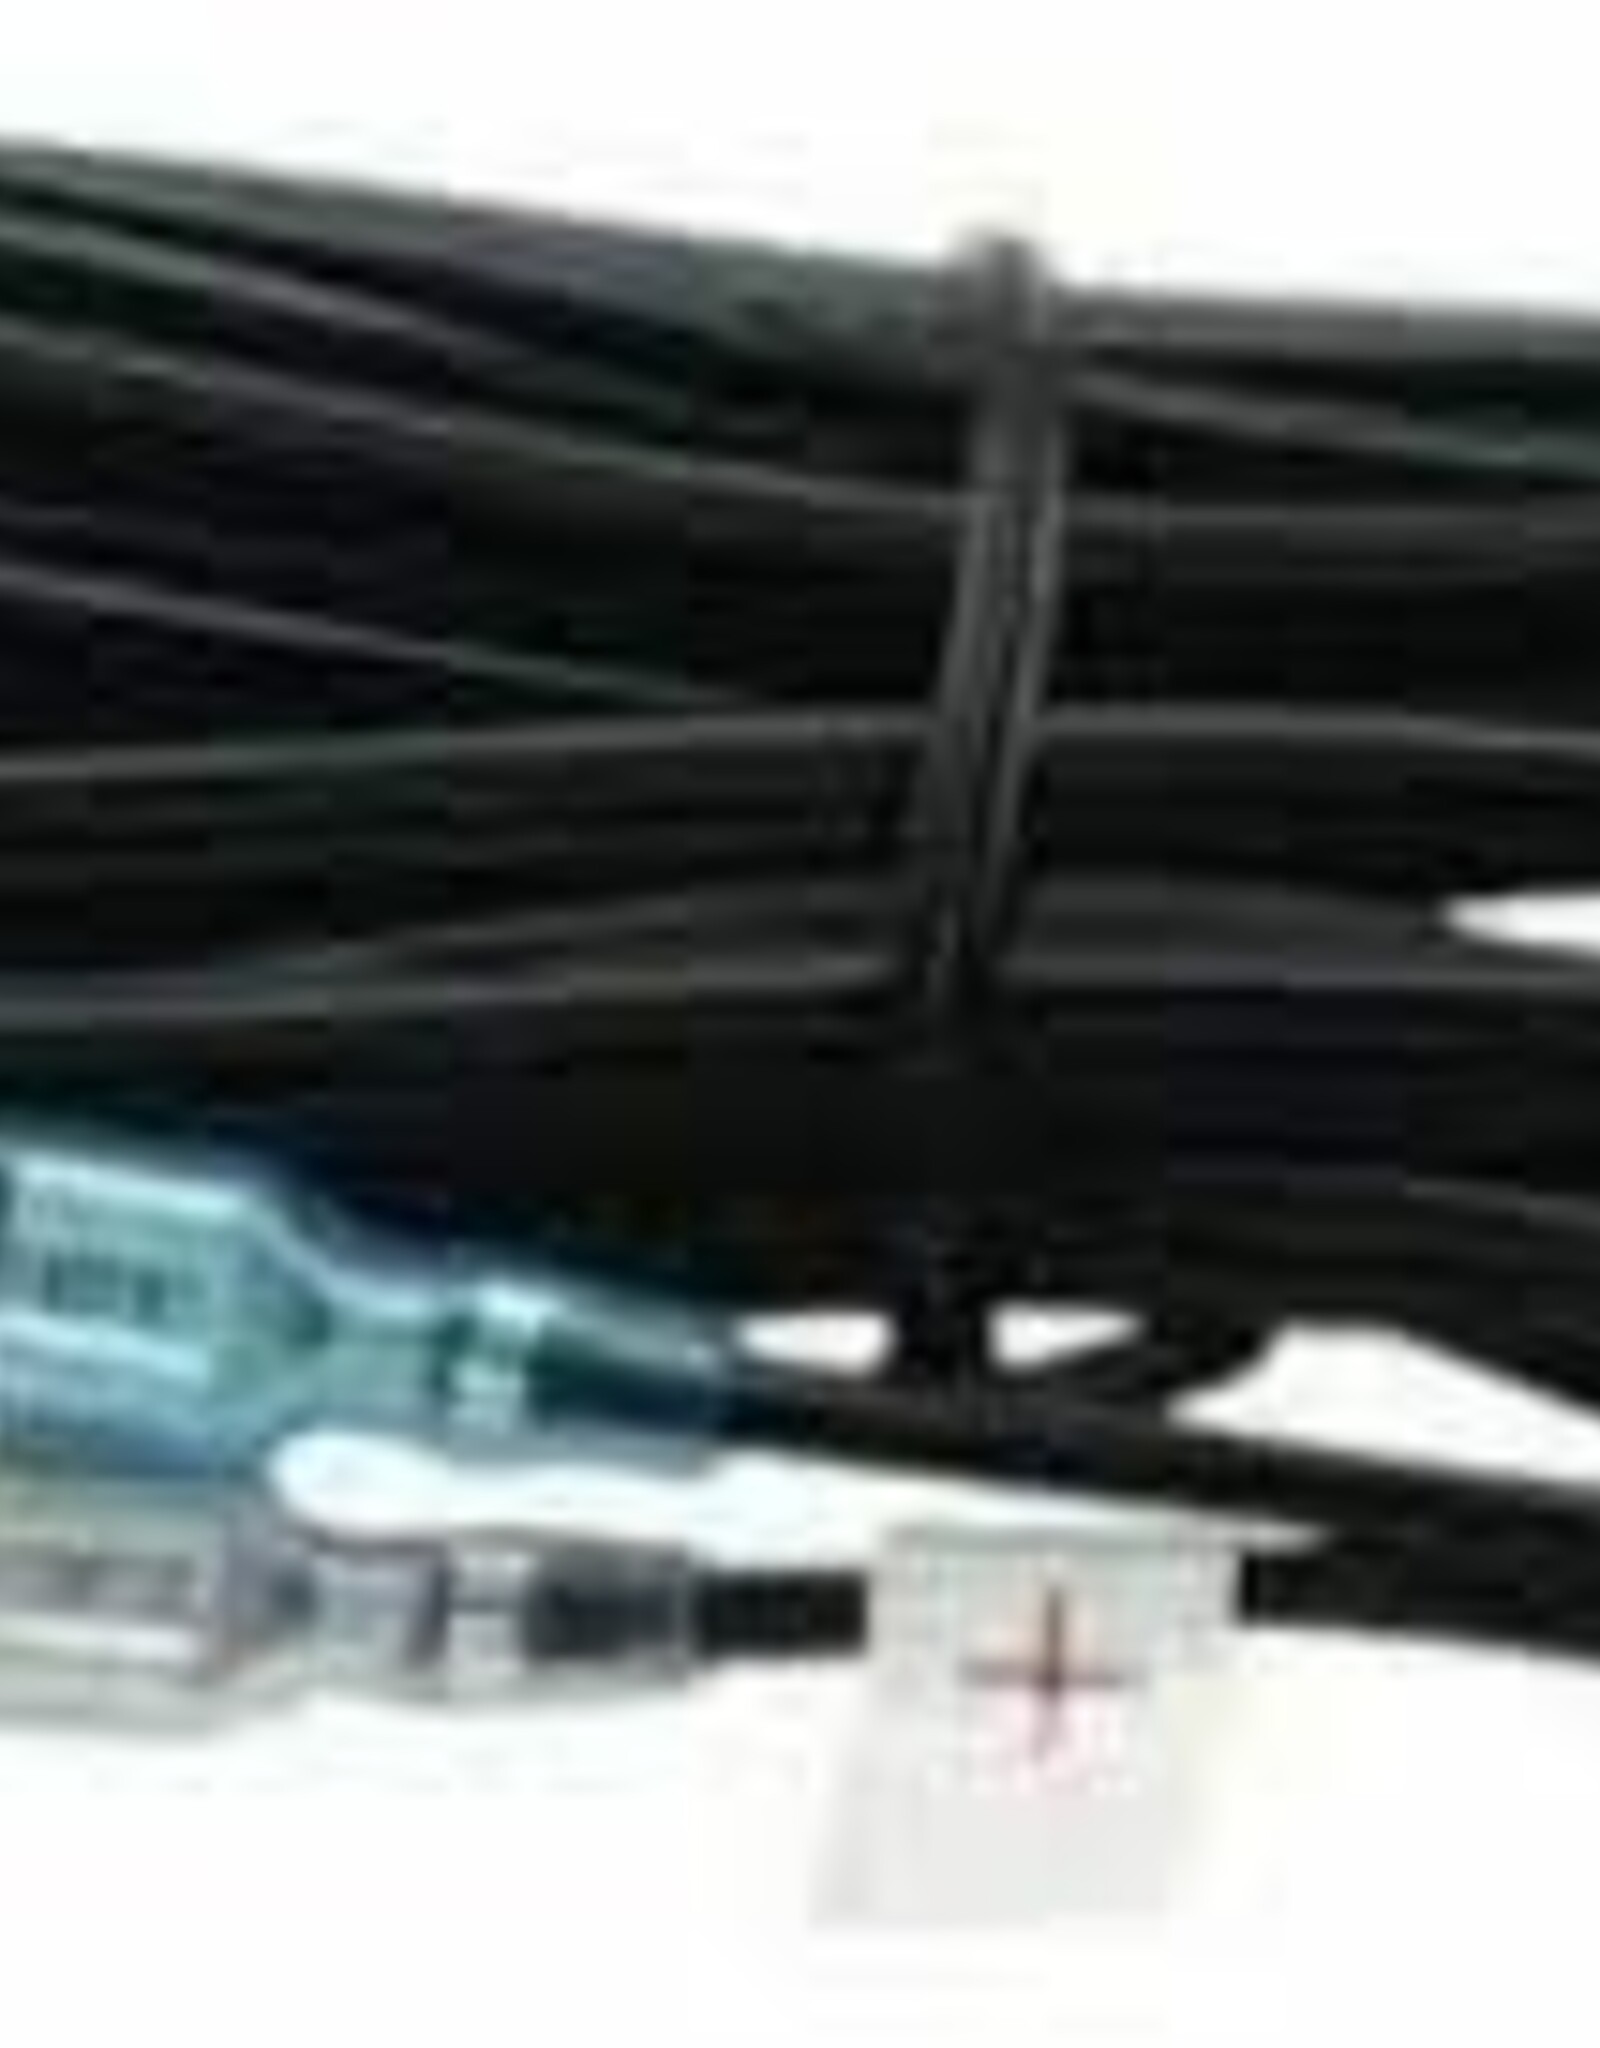 Stealth Cam Battery Cable